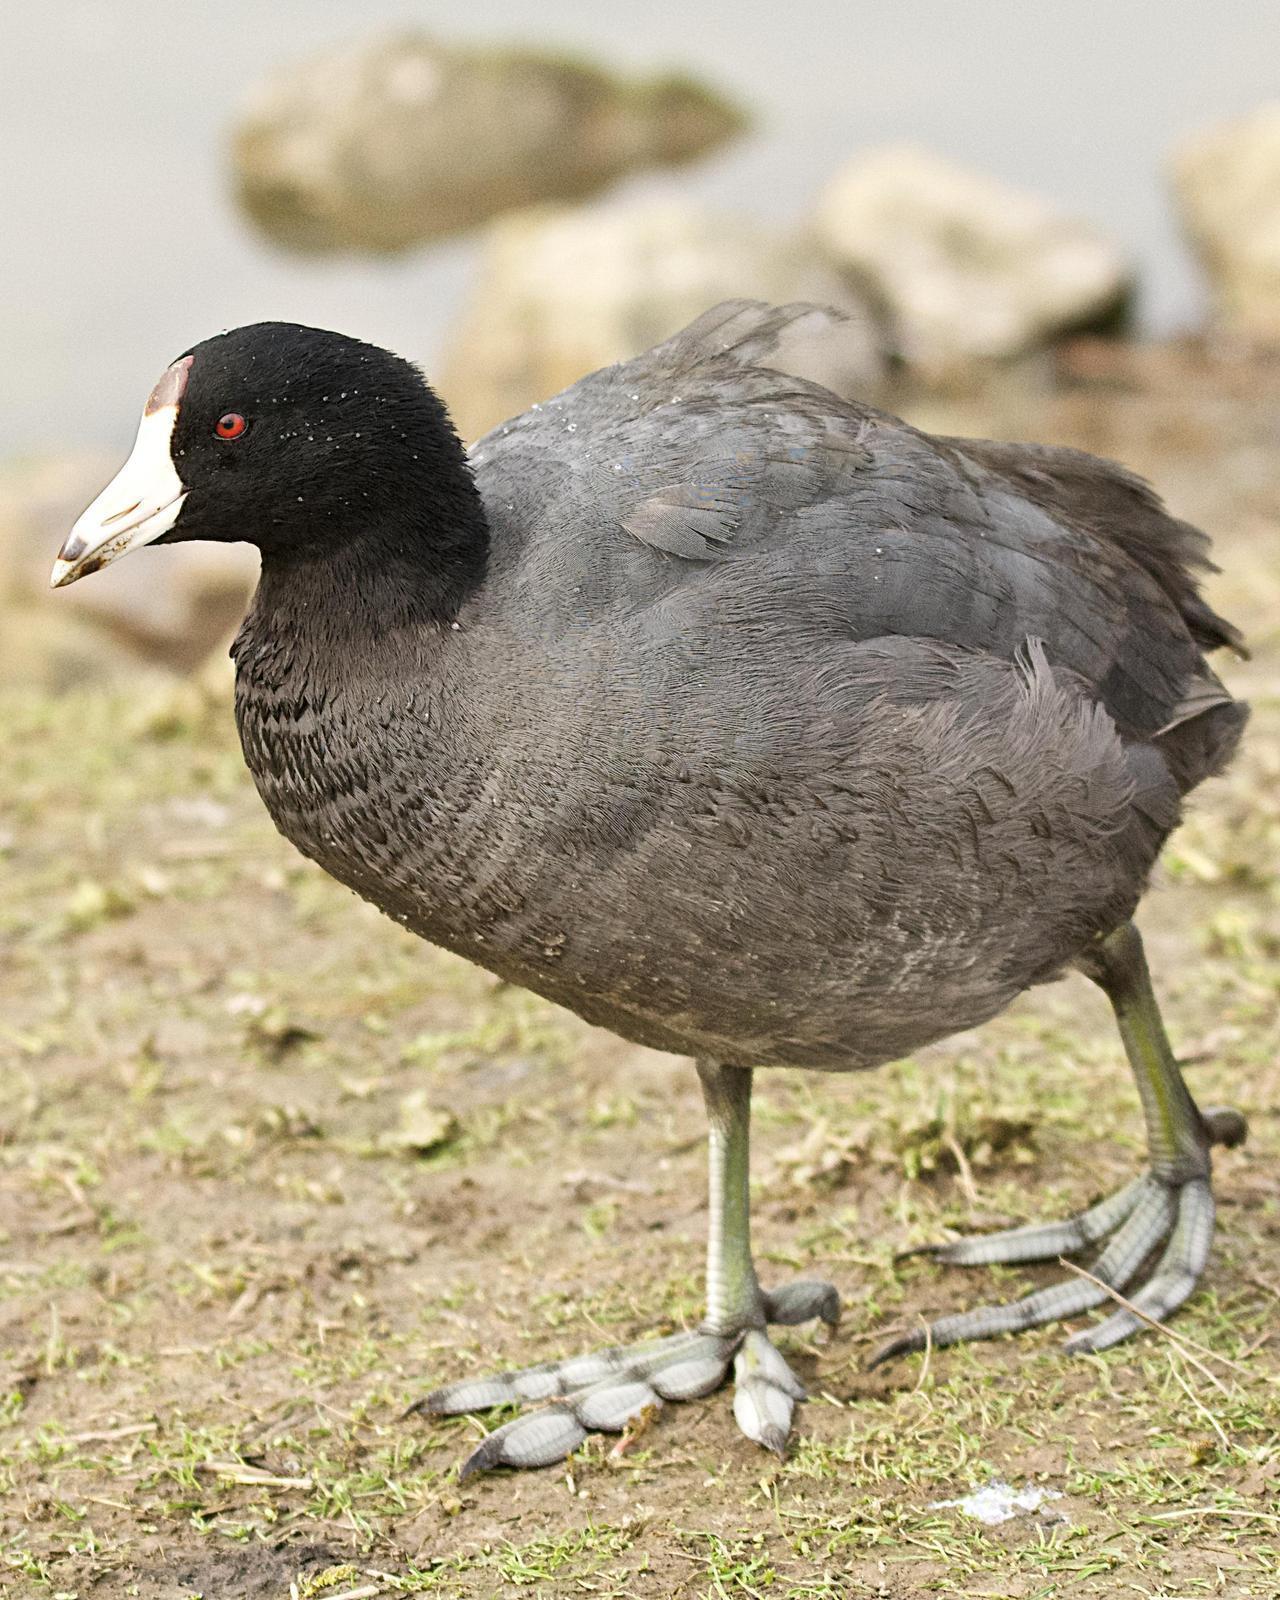 American Coot Photo by Brian Avent